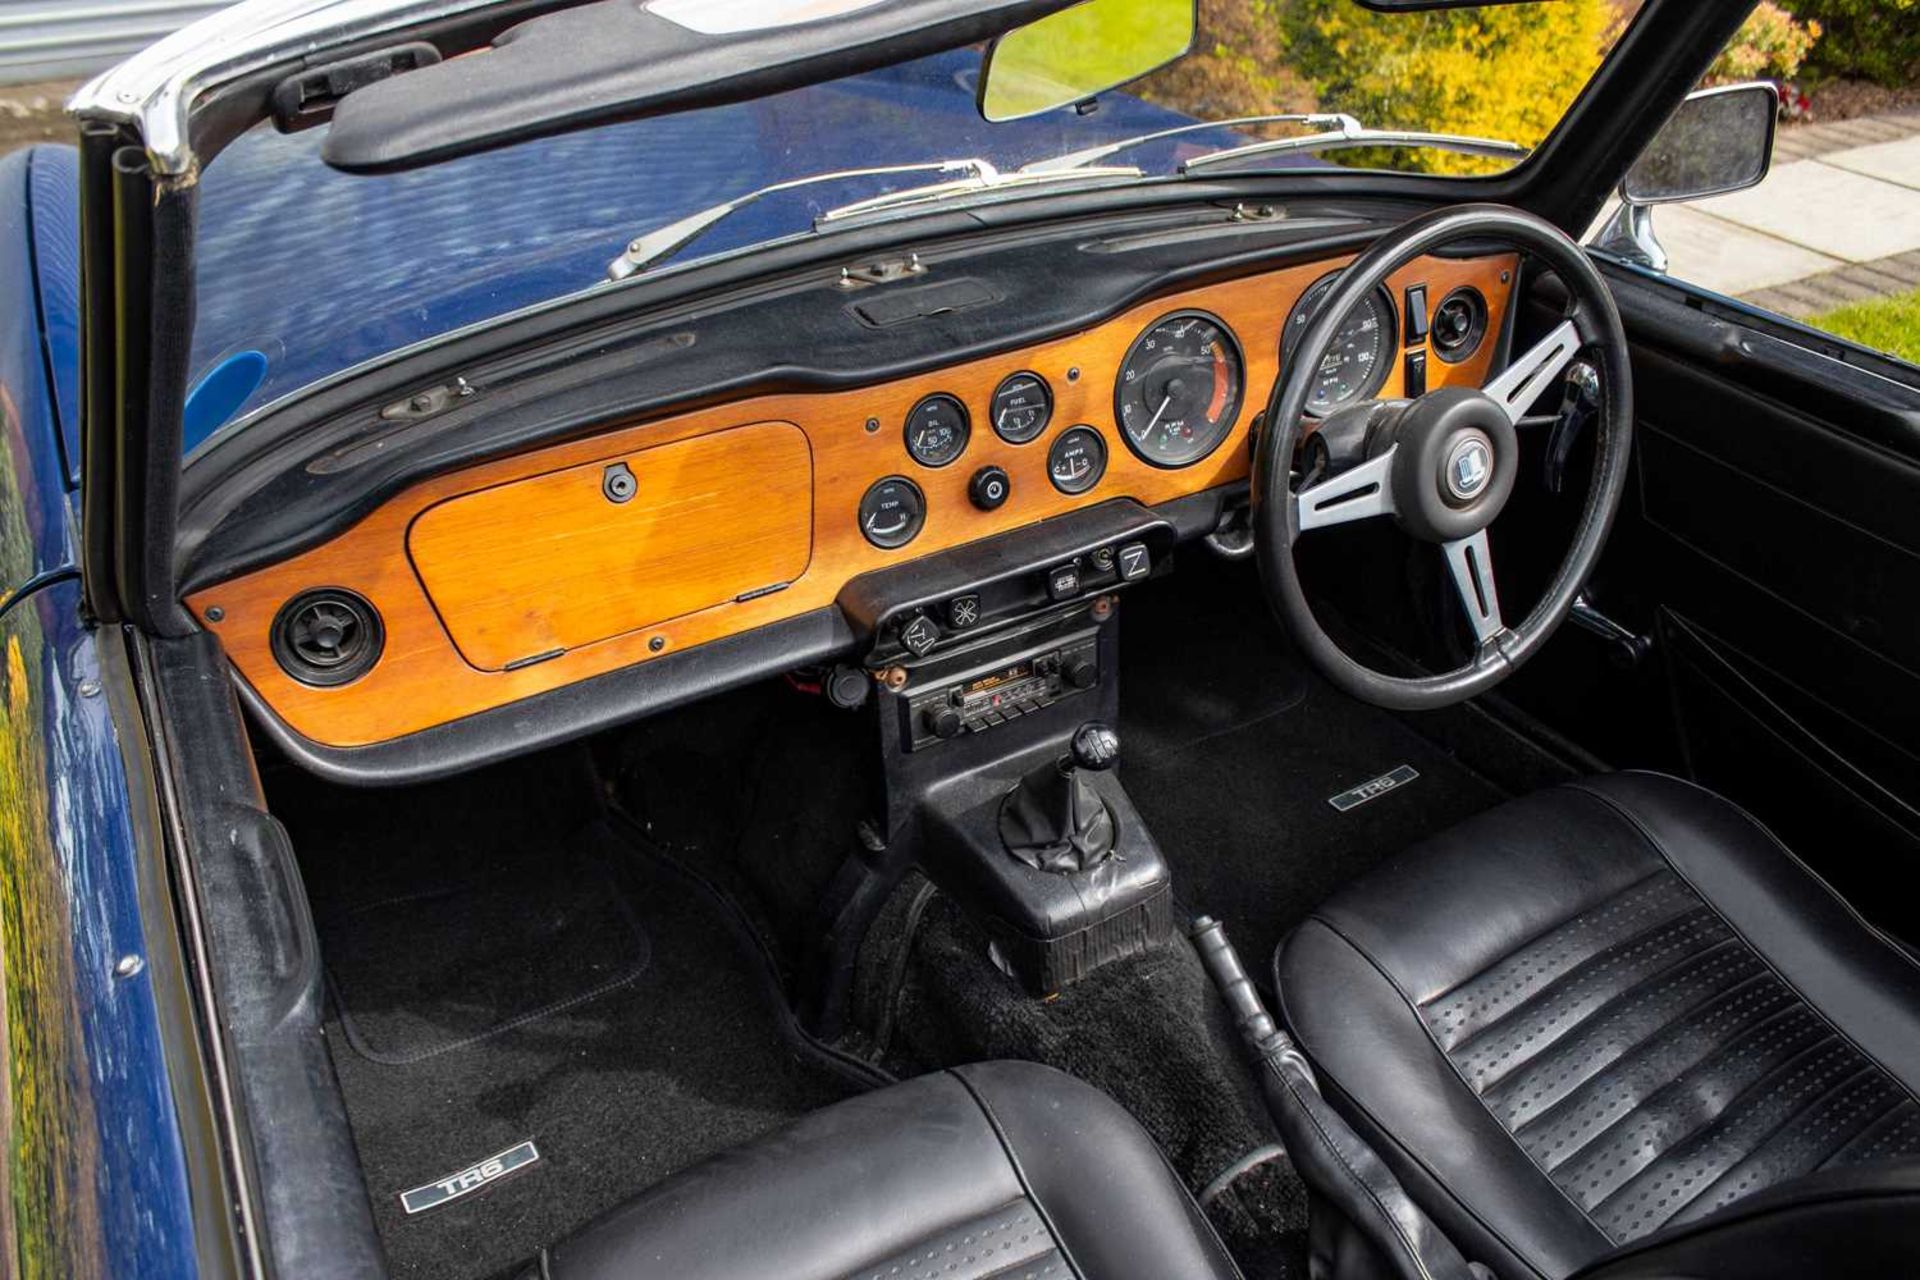 1972 Triumph TR6 Home market example, specified with manual overdrive transmission - Image 75 of 95